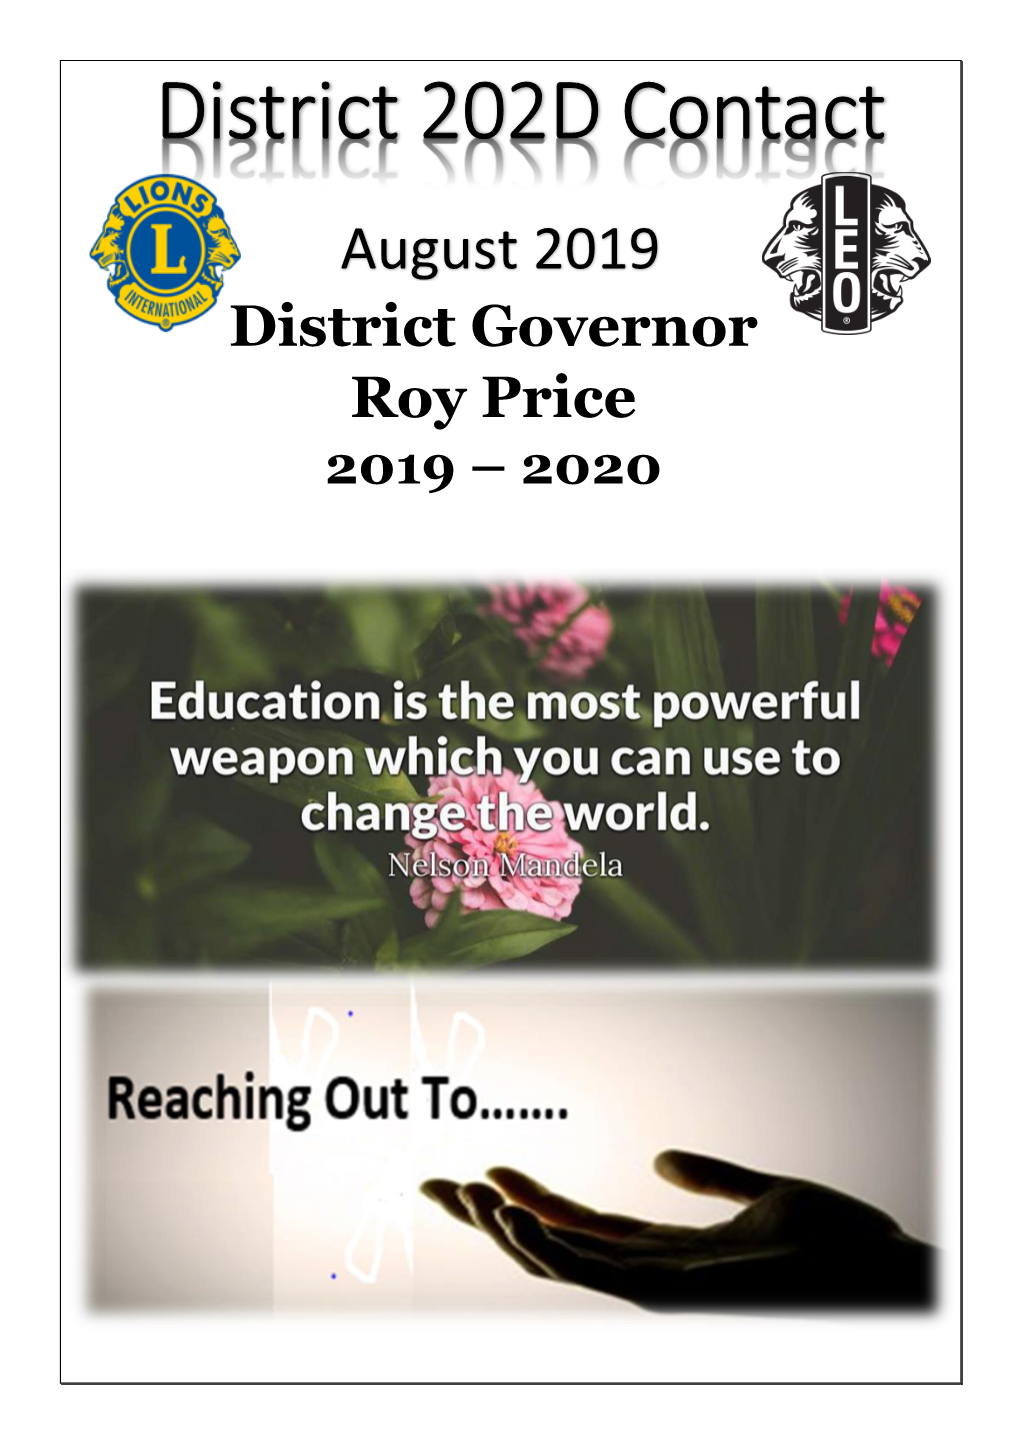 District 202D Contact August 2019 District Governor Roy Price 2019 – 2020